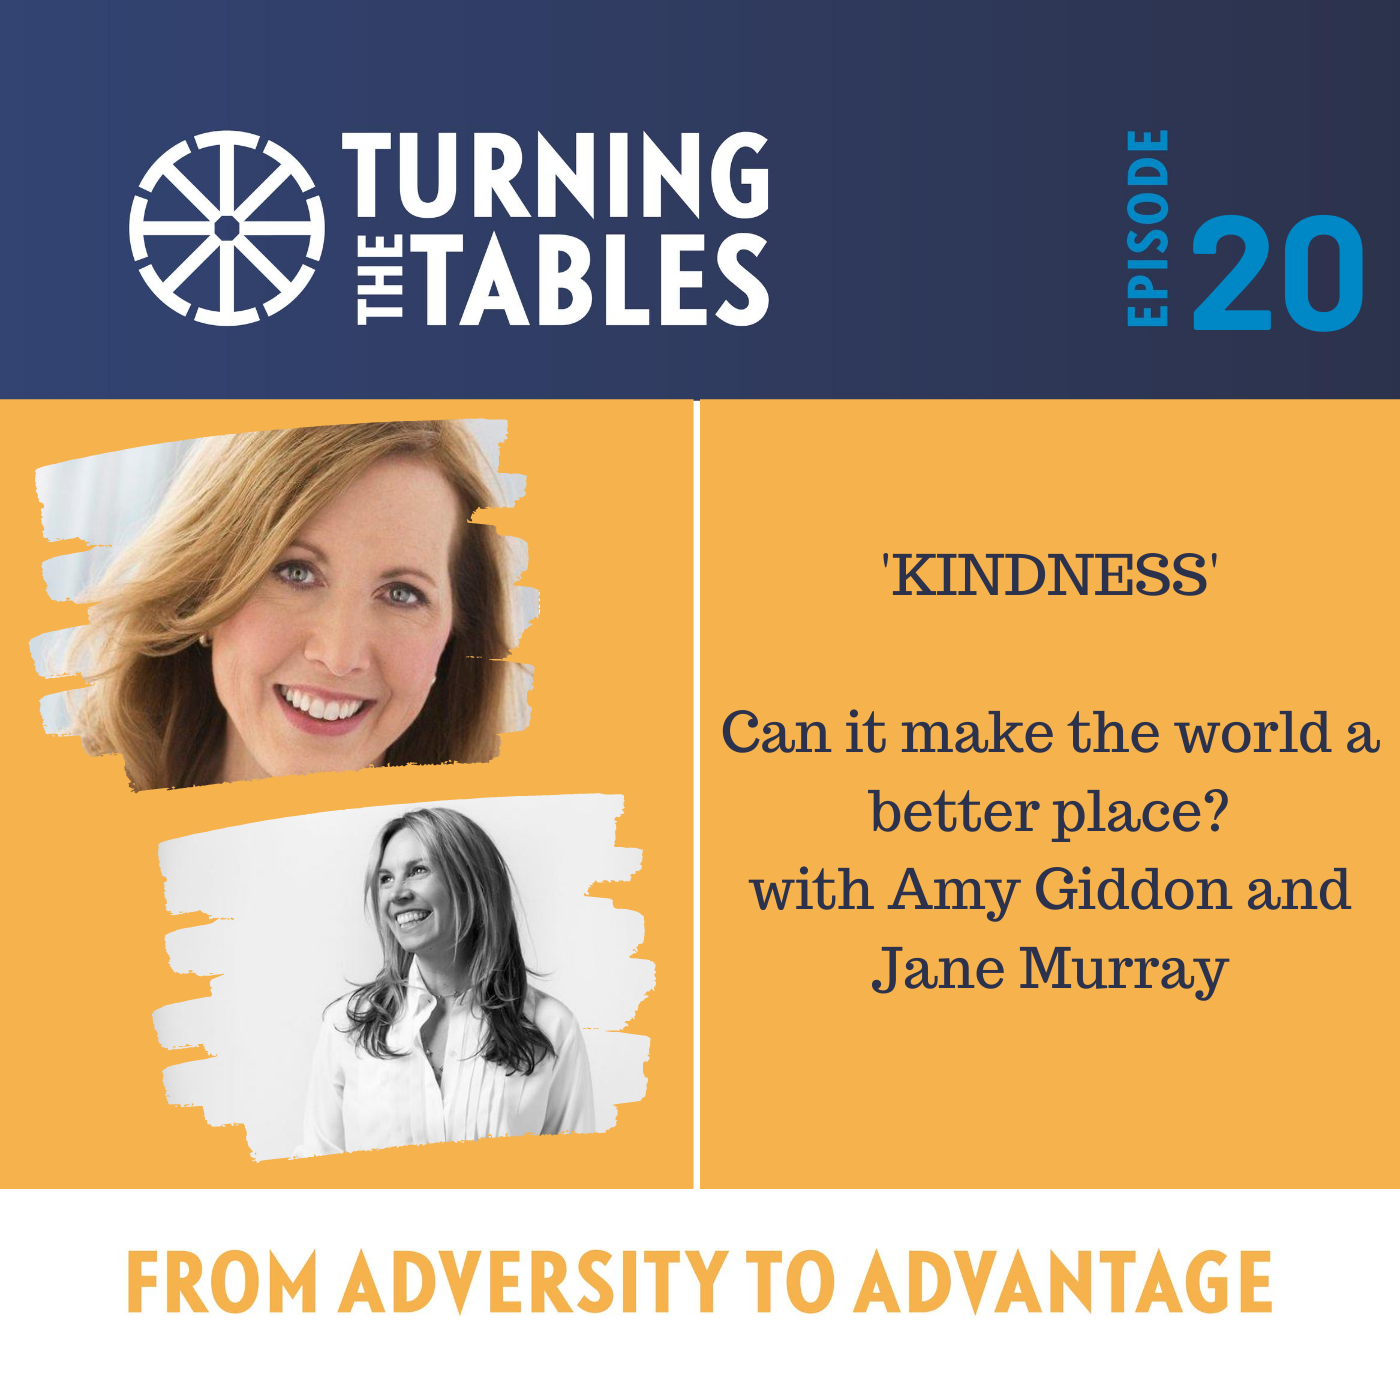 EP20: Kindness - Can it make the world a better place? with Amy Giddon and Jane Murray Image